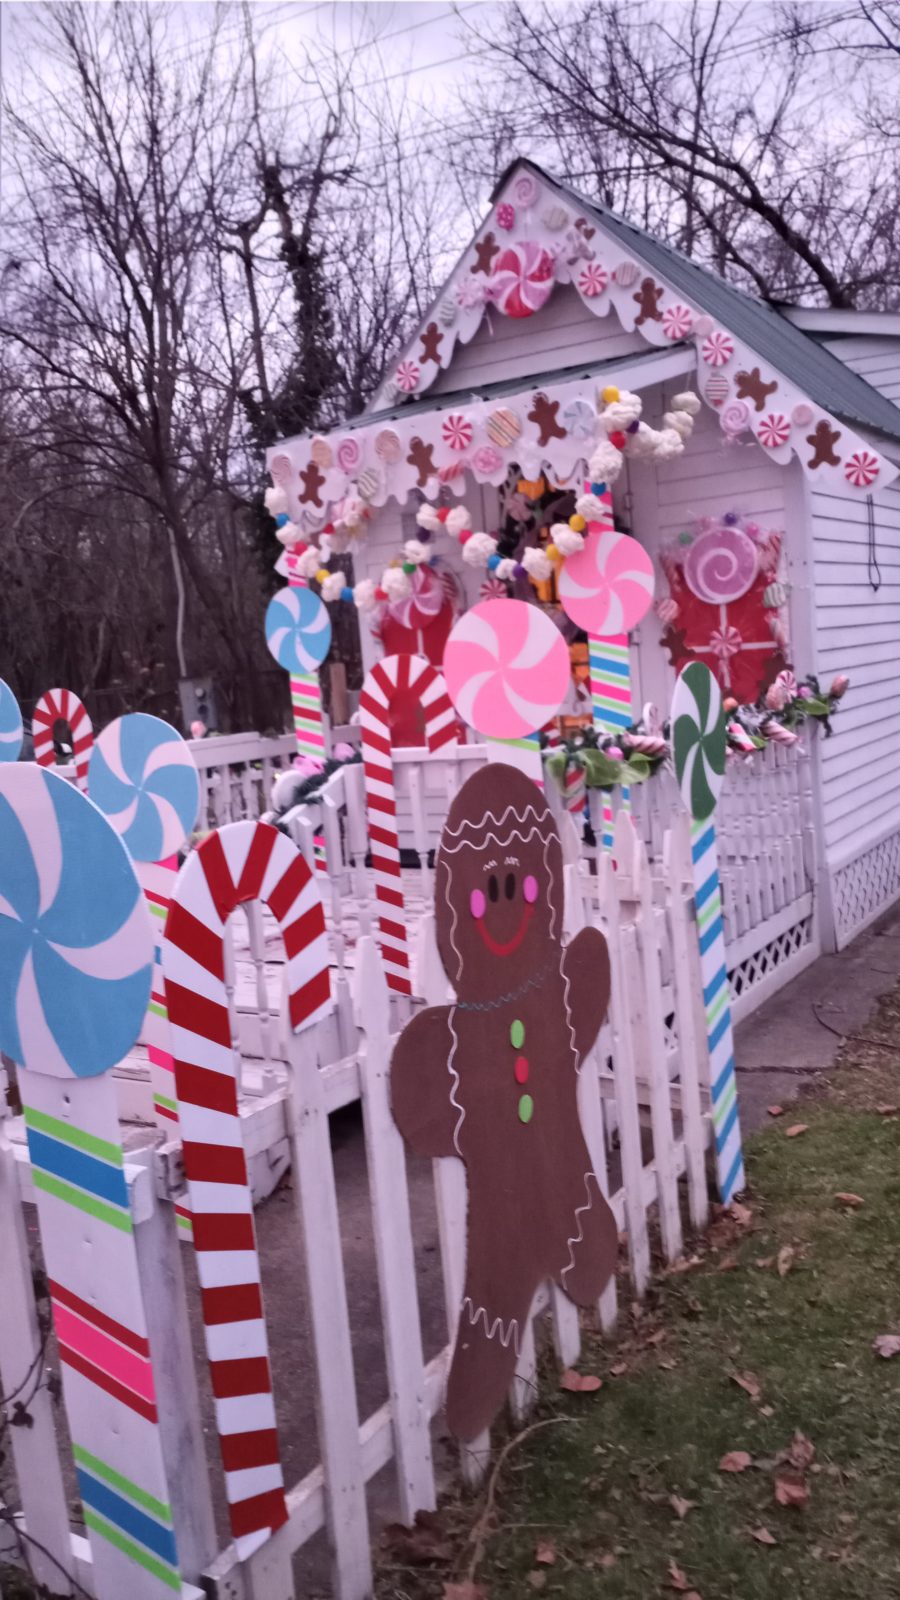 Michelle’s Life-Size Gingerbread House Holiday Decor!